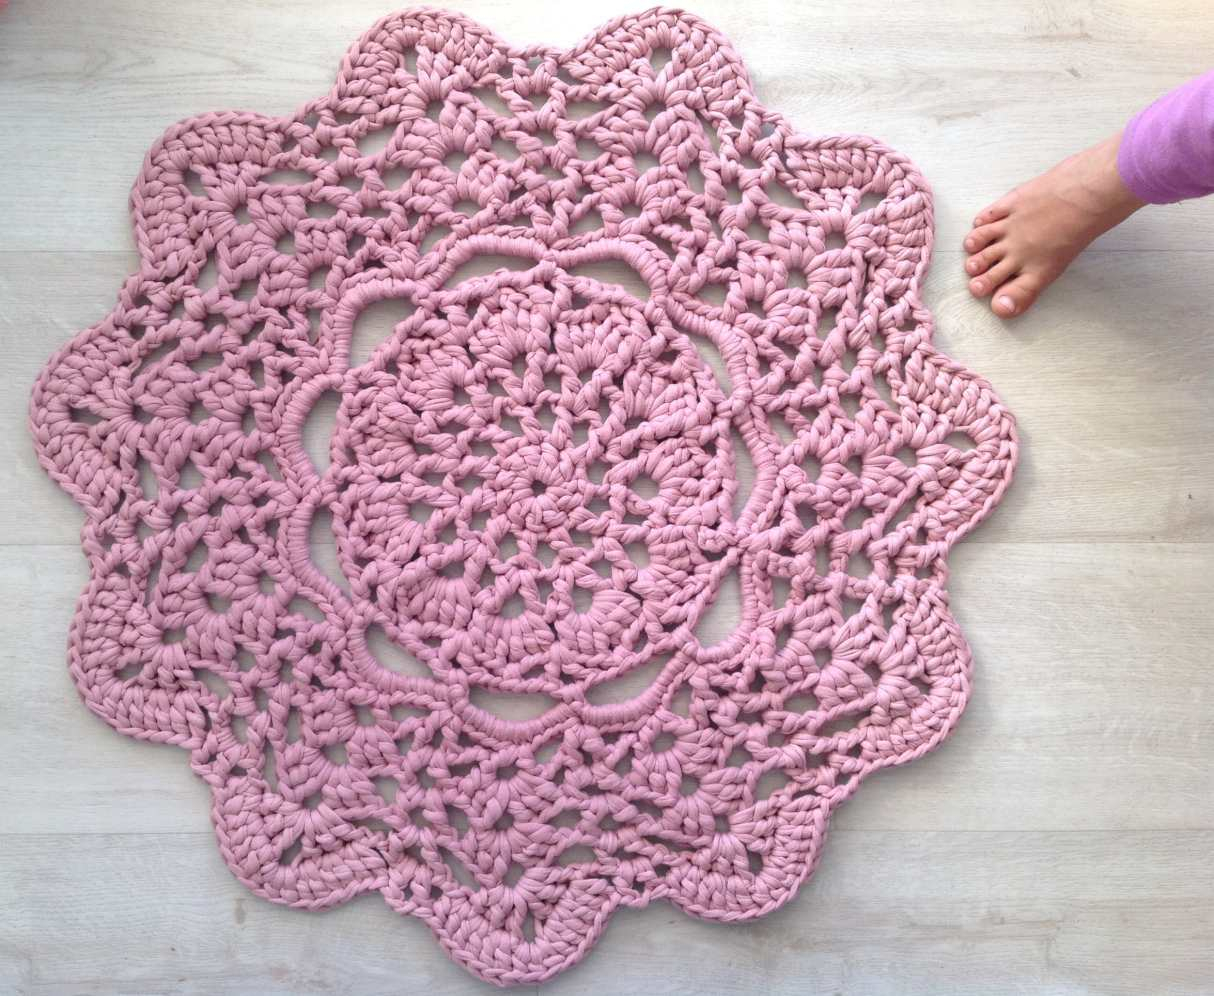 Crochet Thread Patterns 10 Free Thread And Lace Crochet Doily Patterns